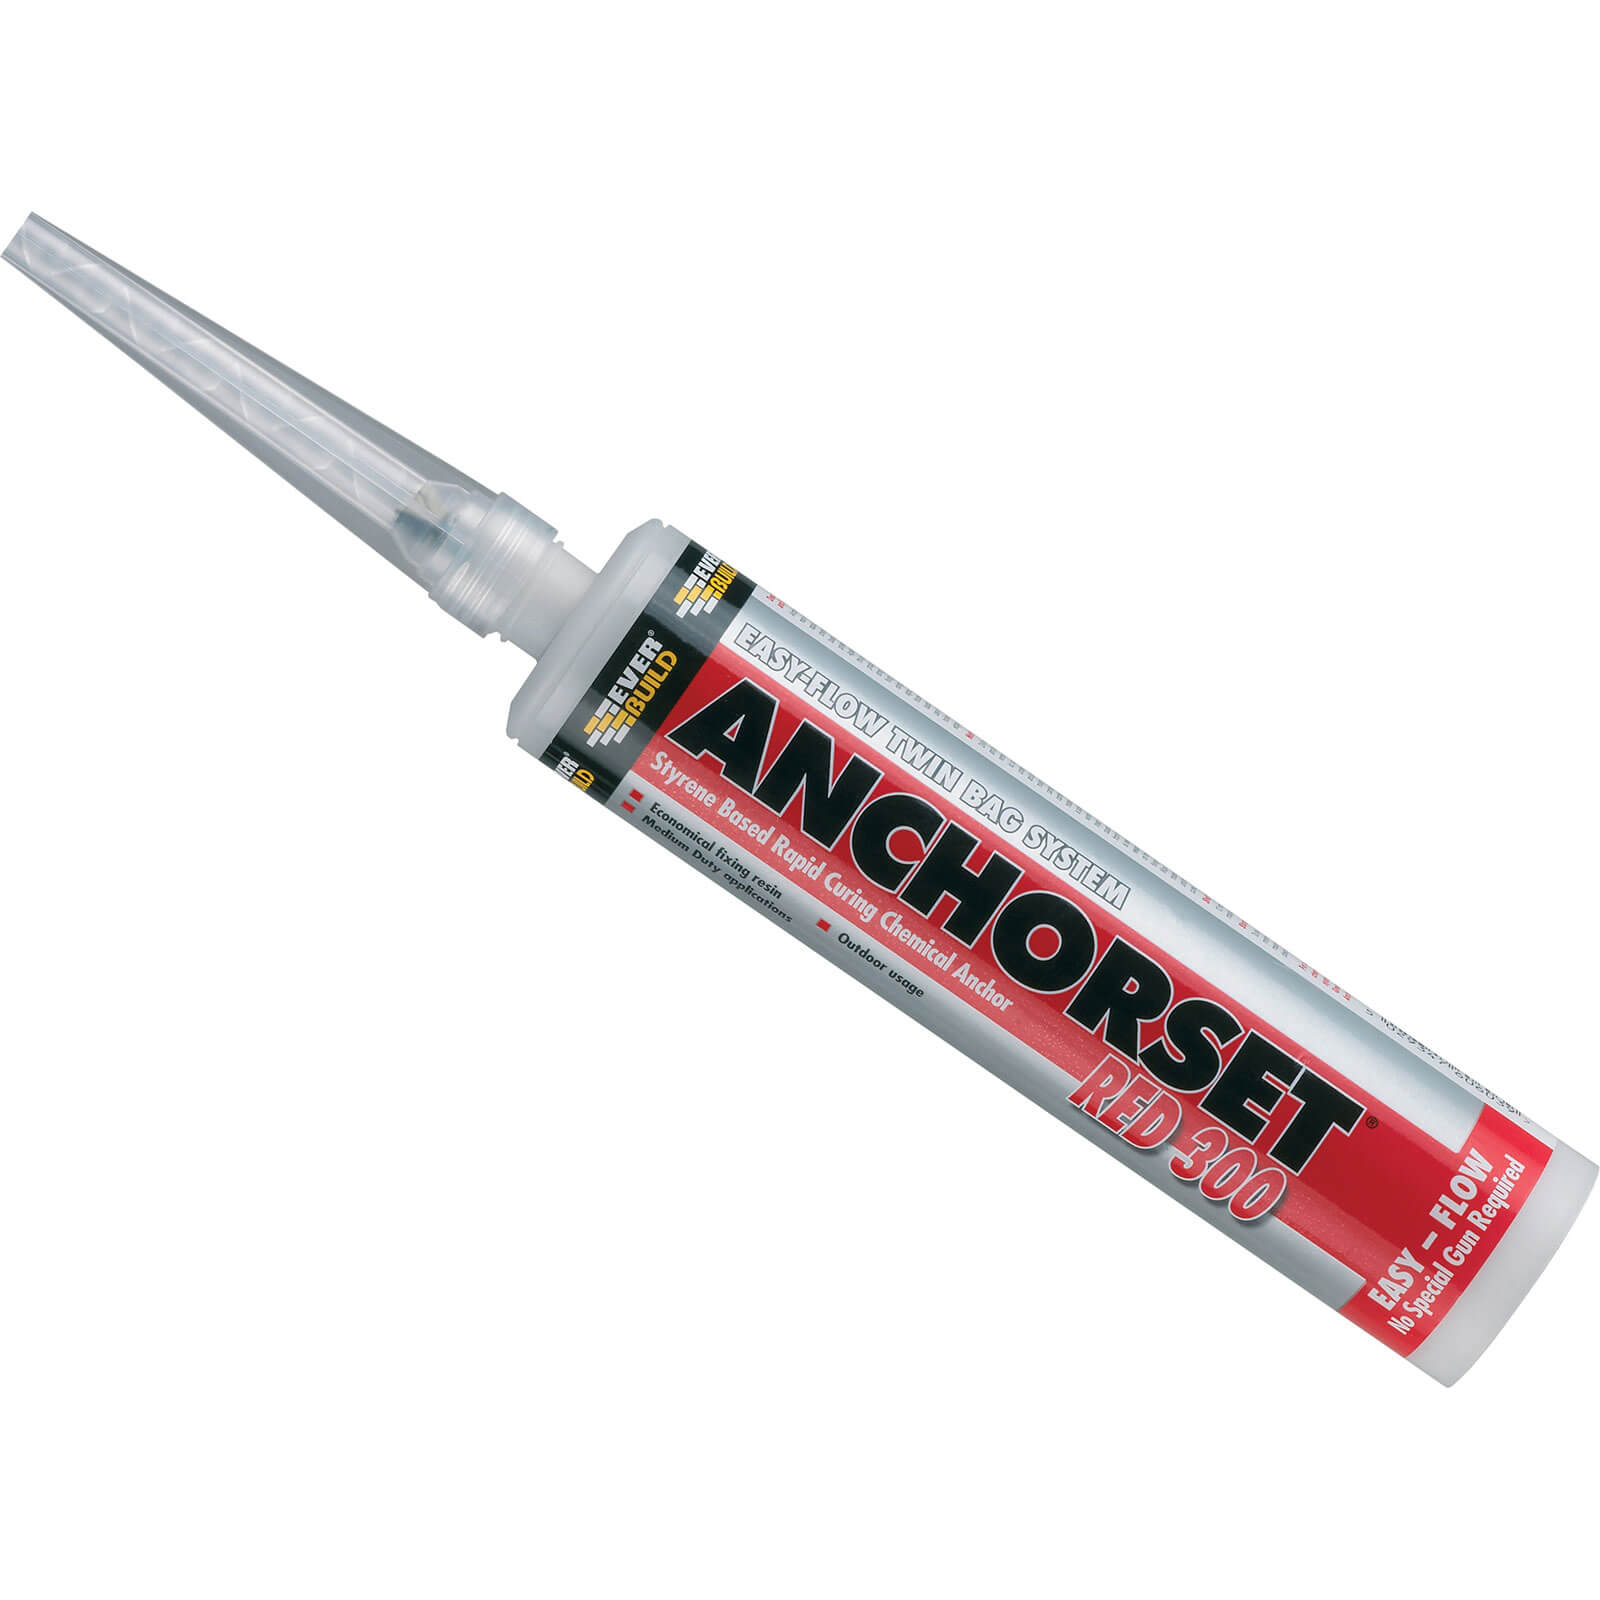 Everbuild Anchorset Chemical Anchor 300ml Red